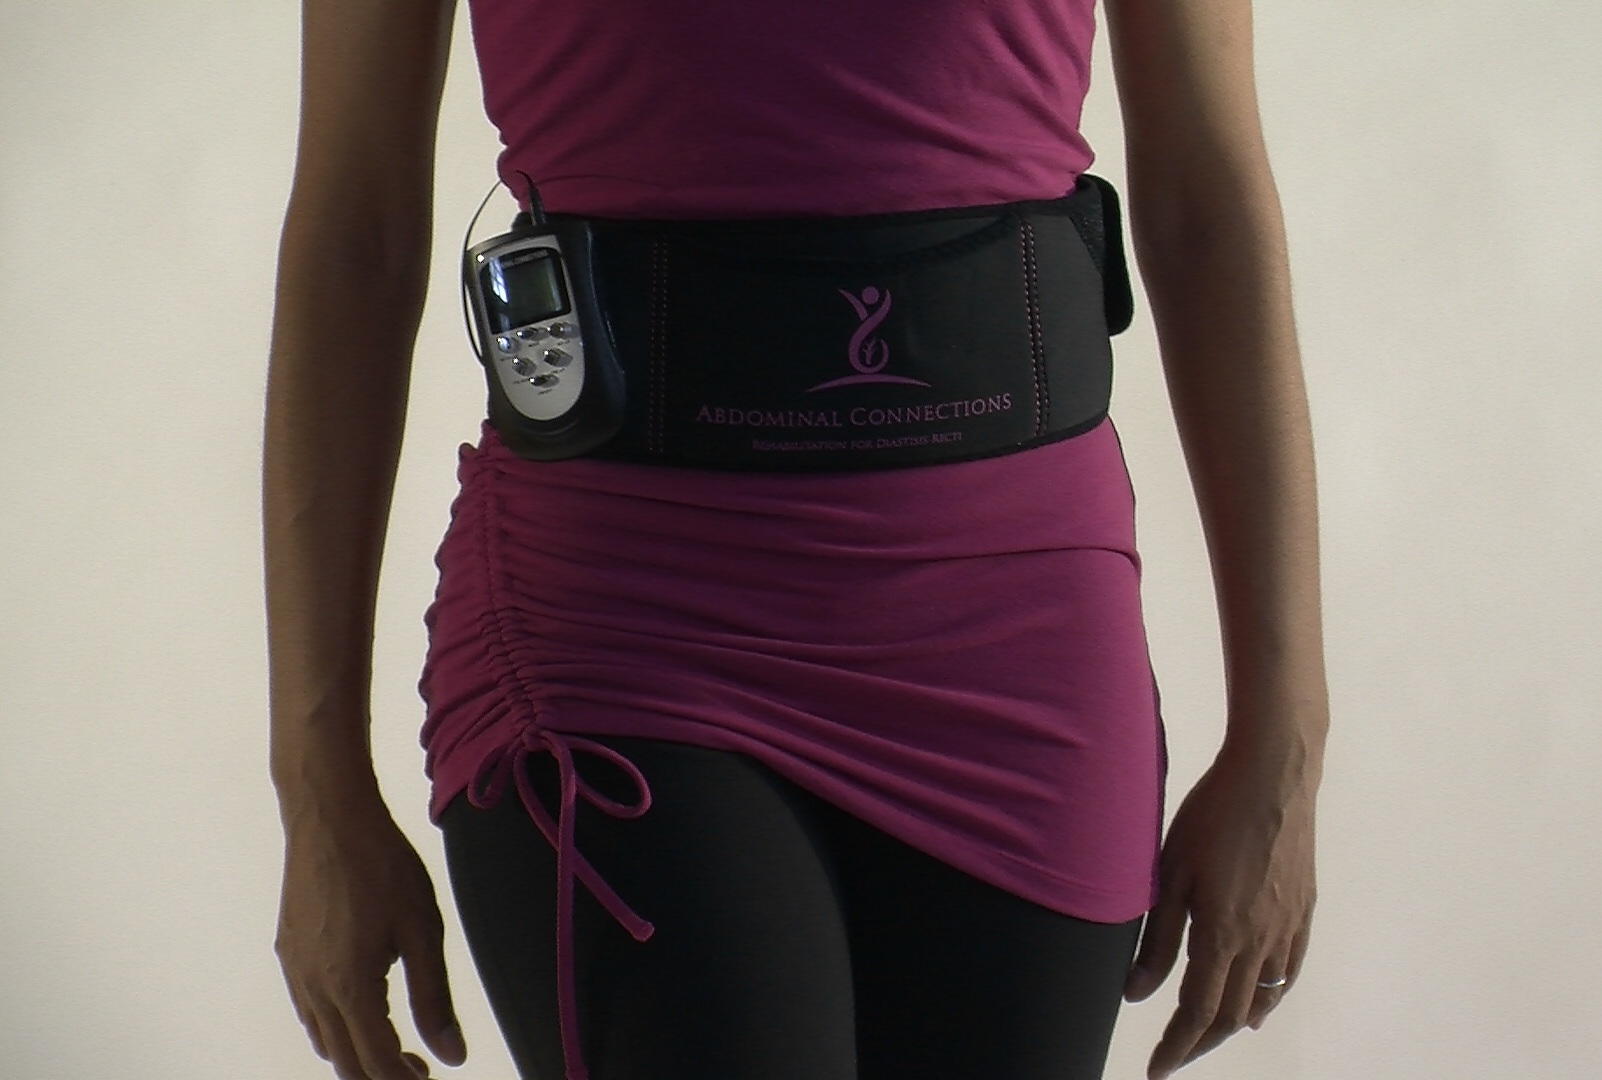 Electric Muscle Stimulator Belt (EMS) - Abdominal Connections